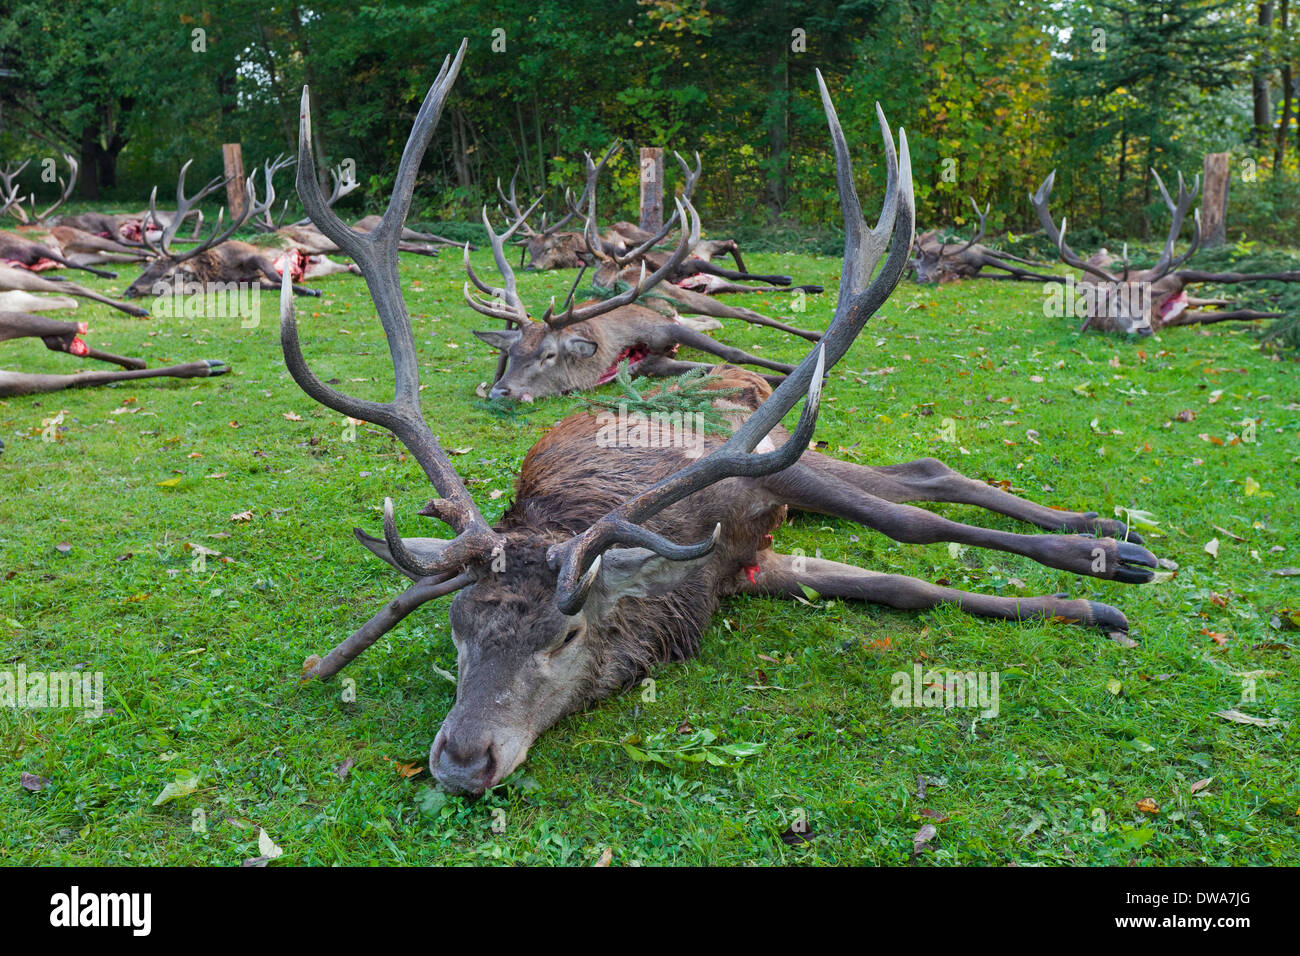 Harvested Red Deer (Cervus elaphus) stags shot and gutted by hunters after the hunt during the hunting season in autumn Stock Photo